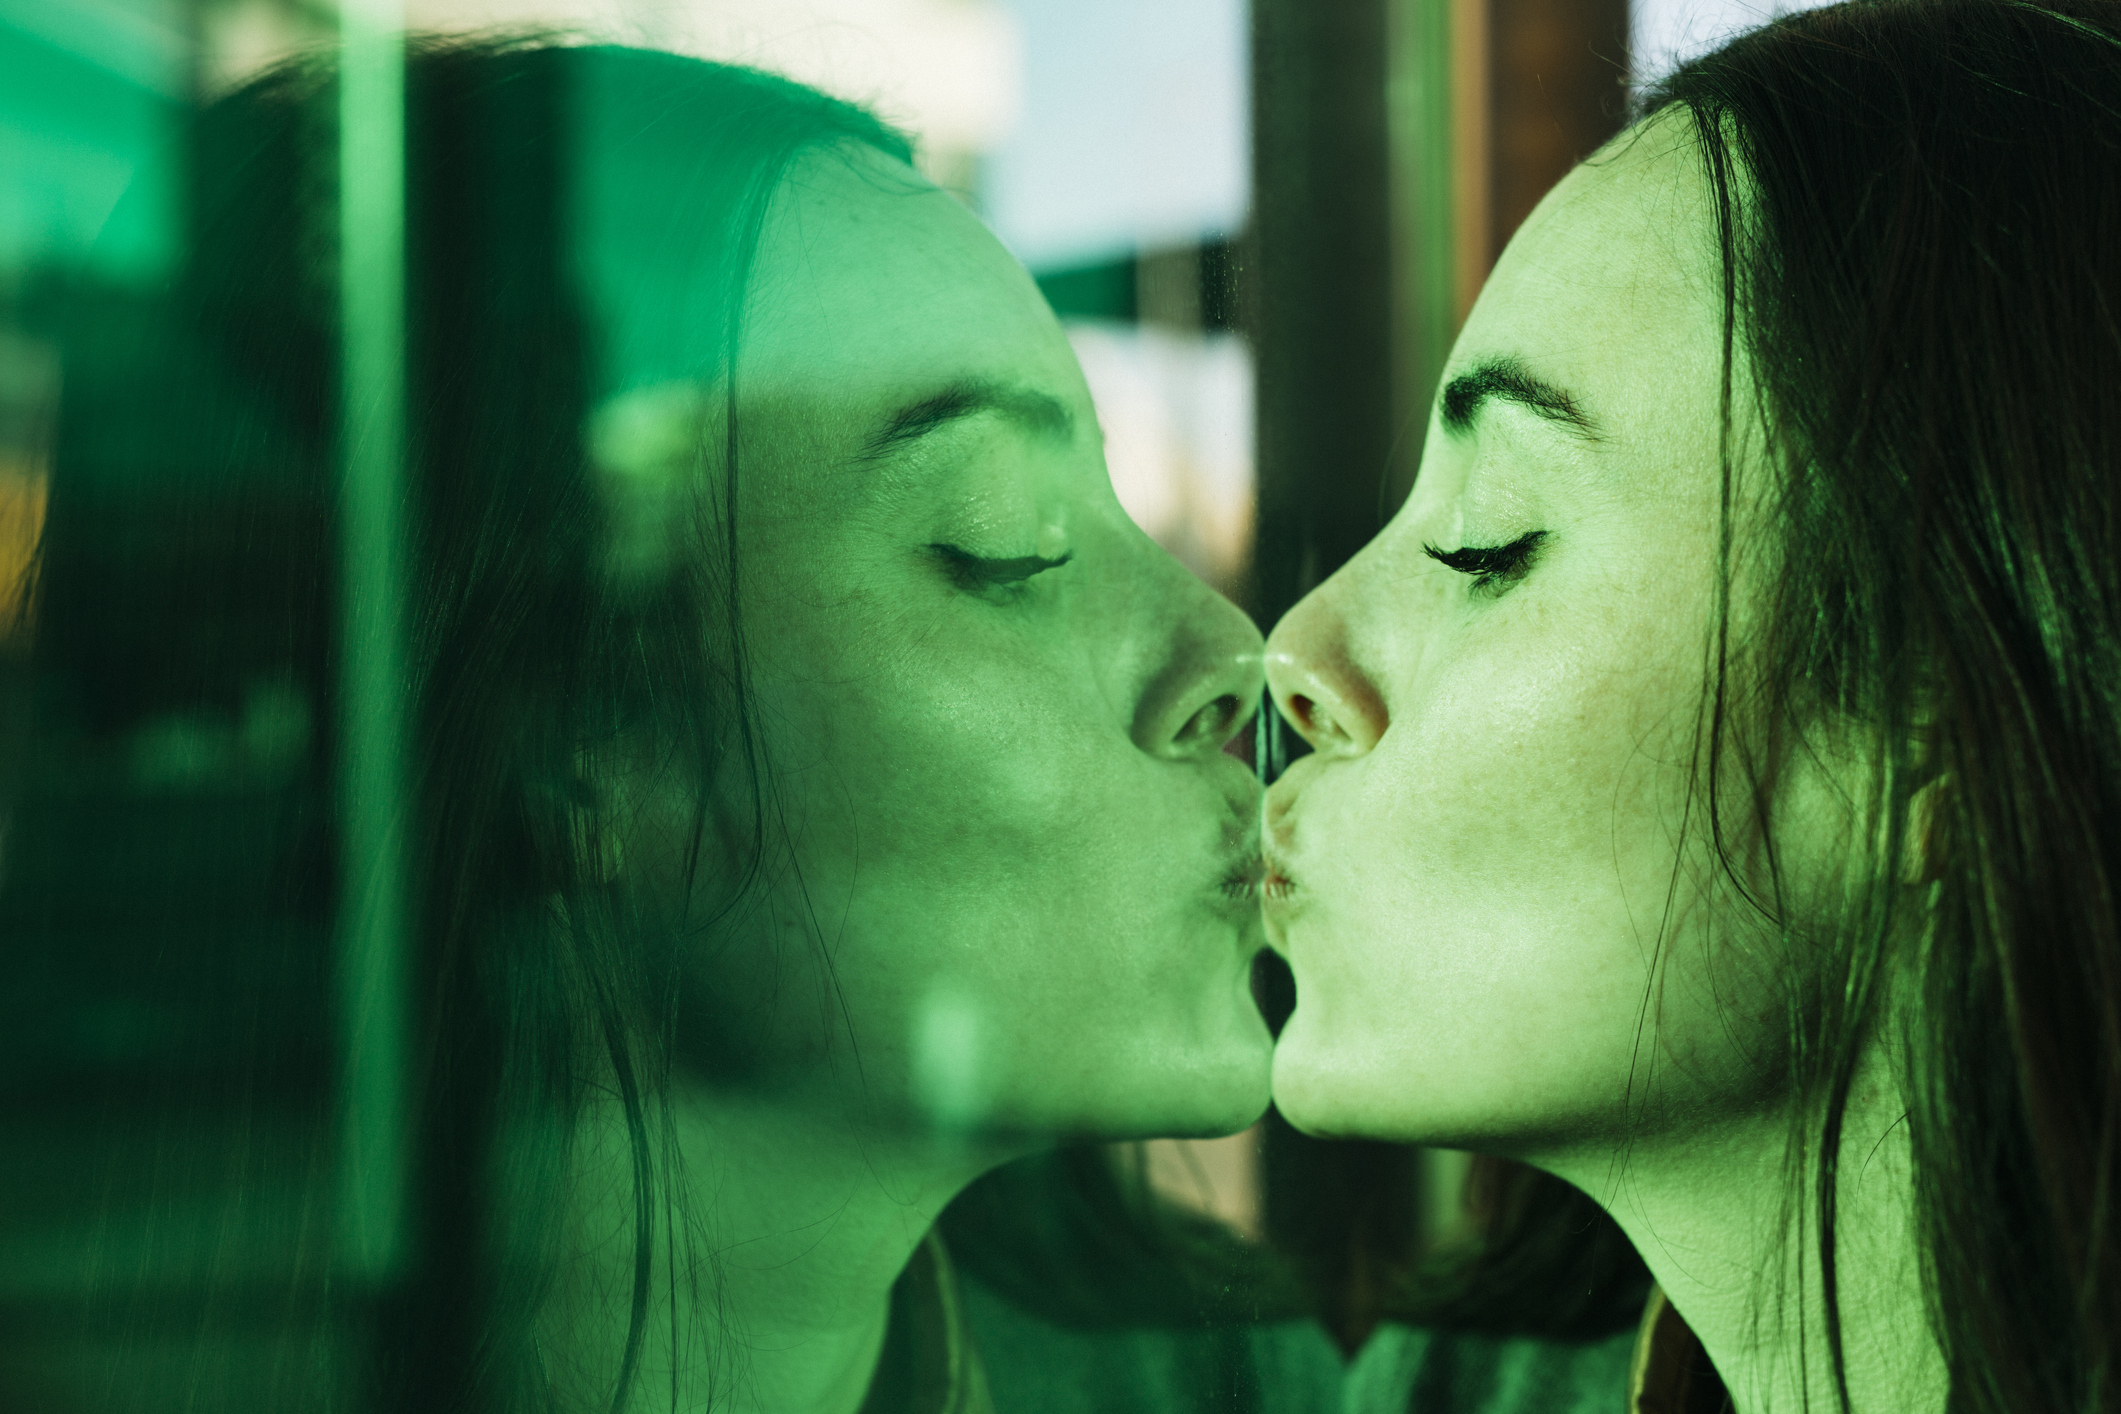 A woman kissing her reflection